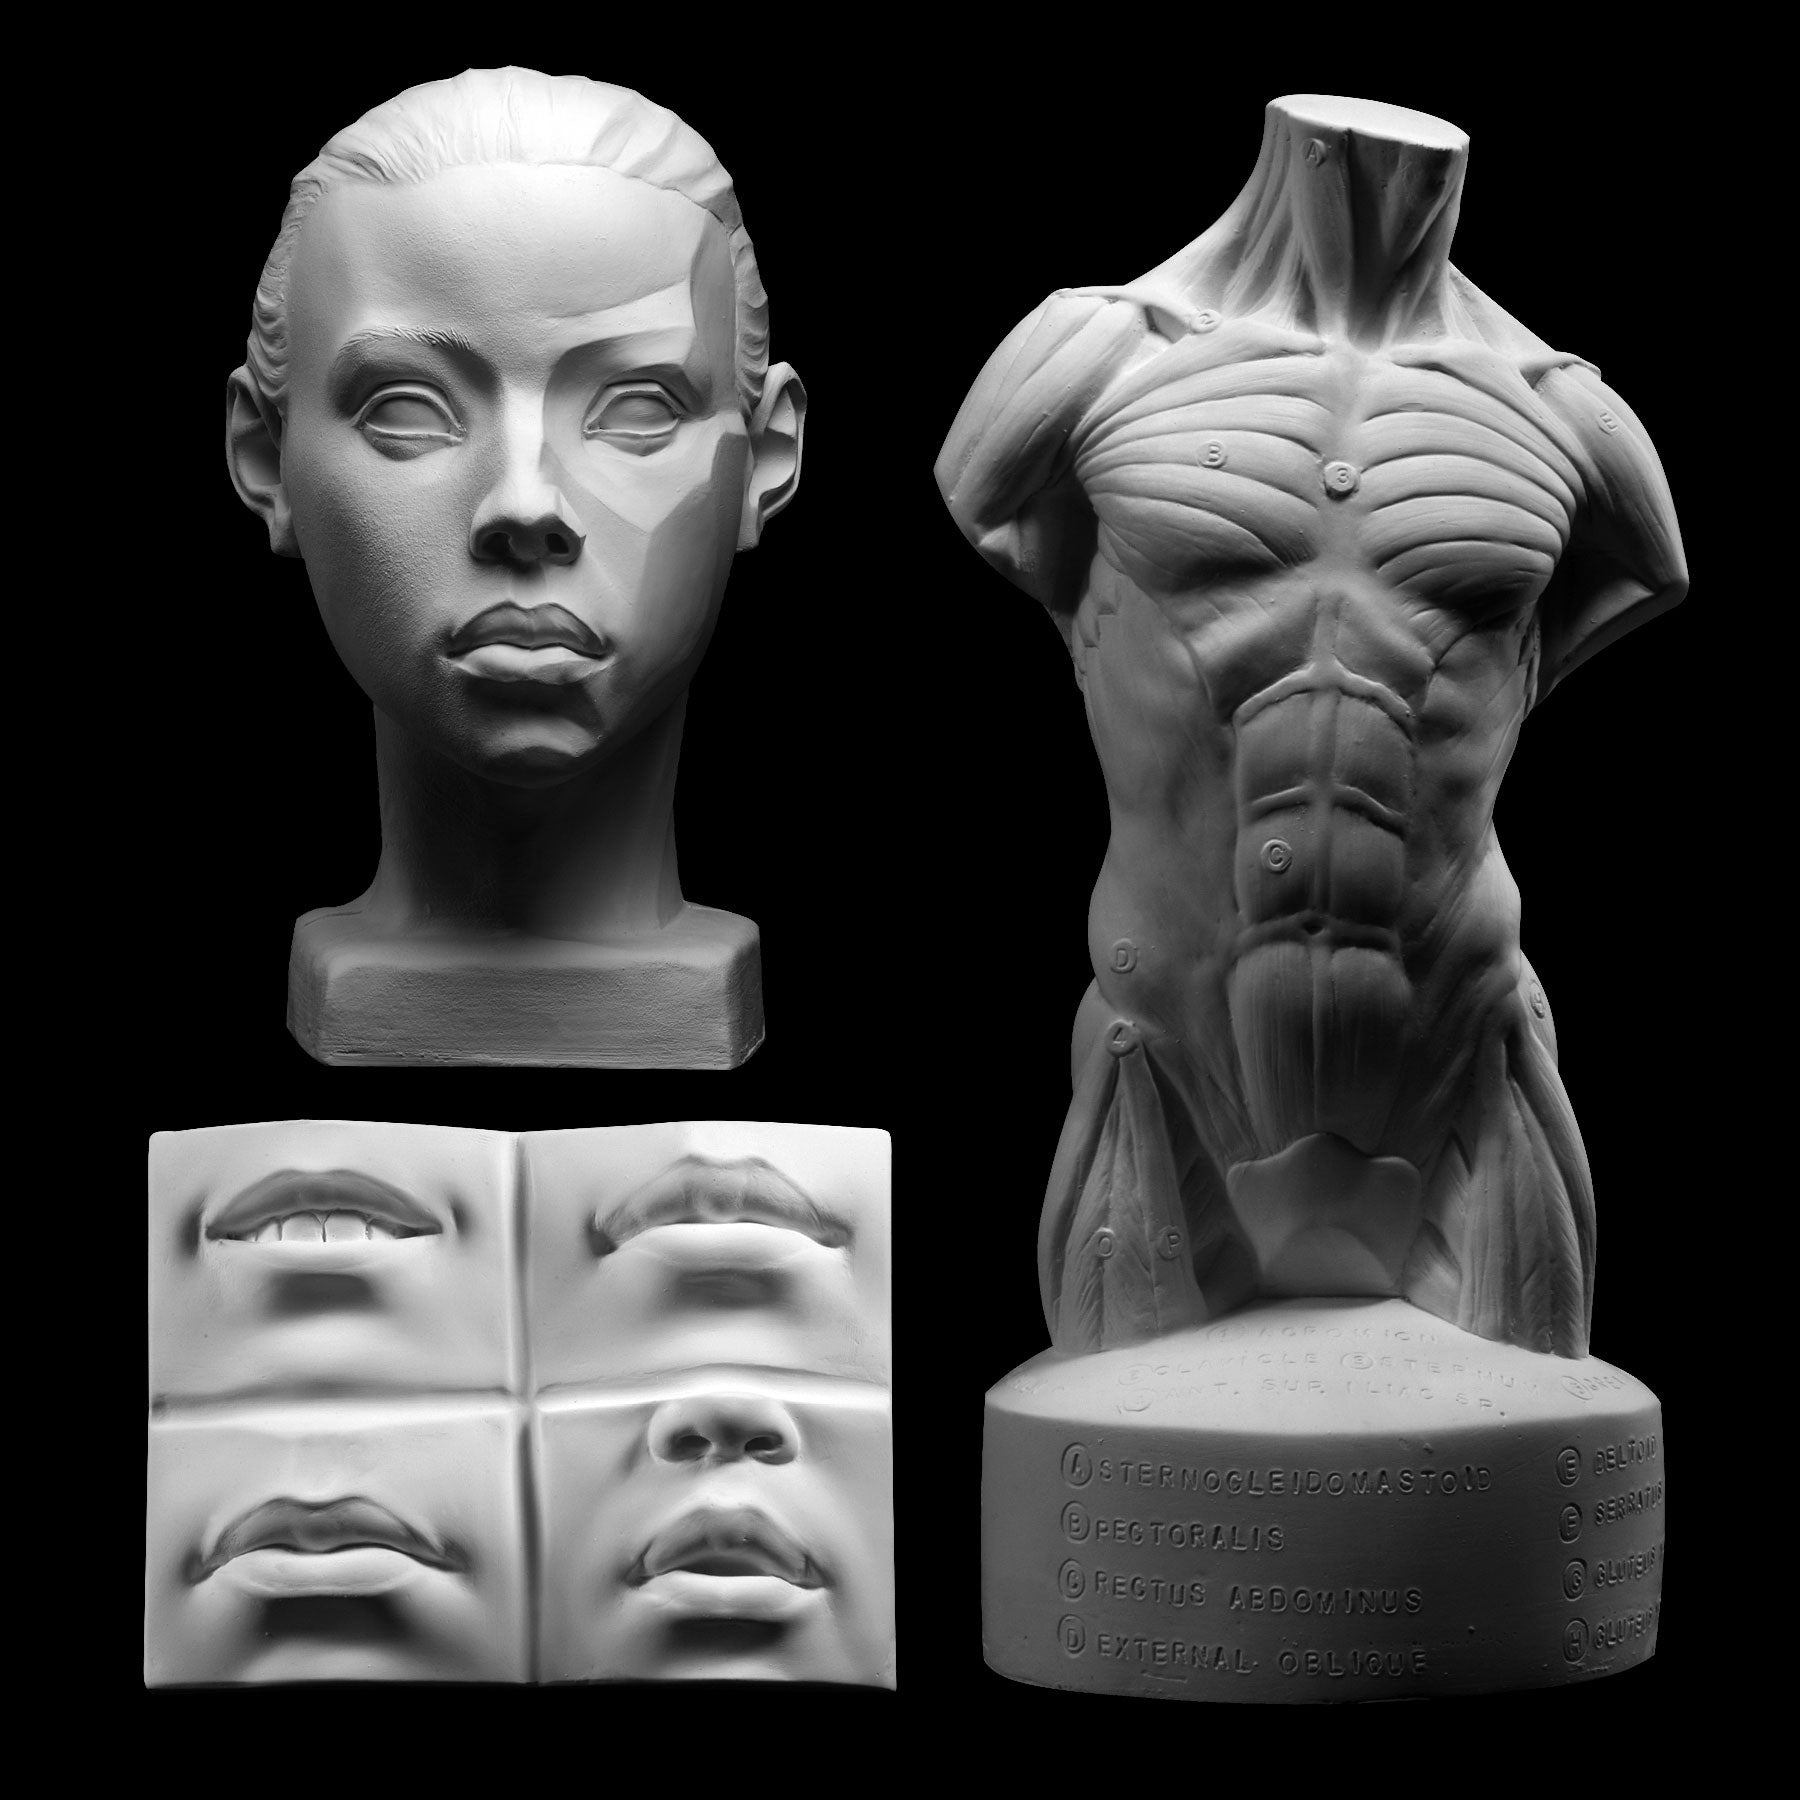 Basic sculpting tools and materials for beginners